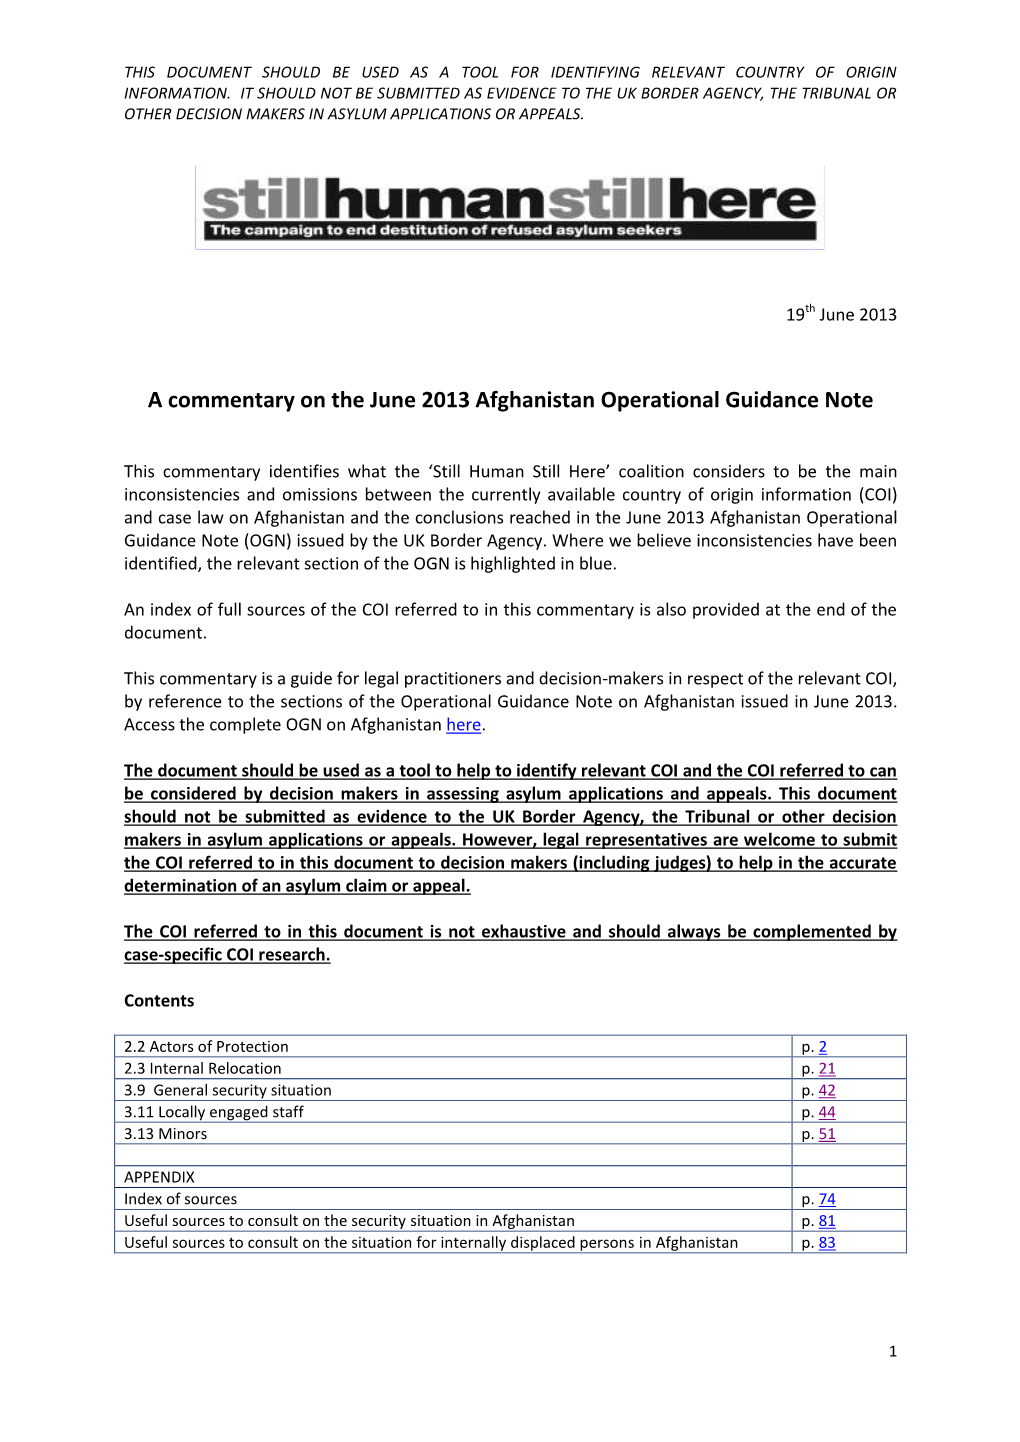 SHSH Commentary on the June 2013 Afghanistan